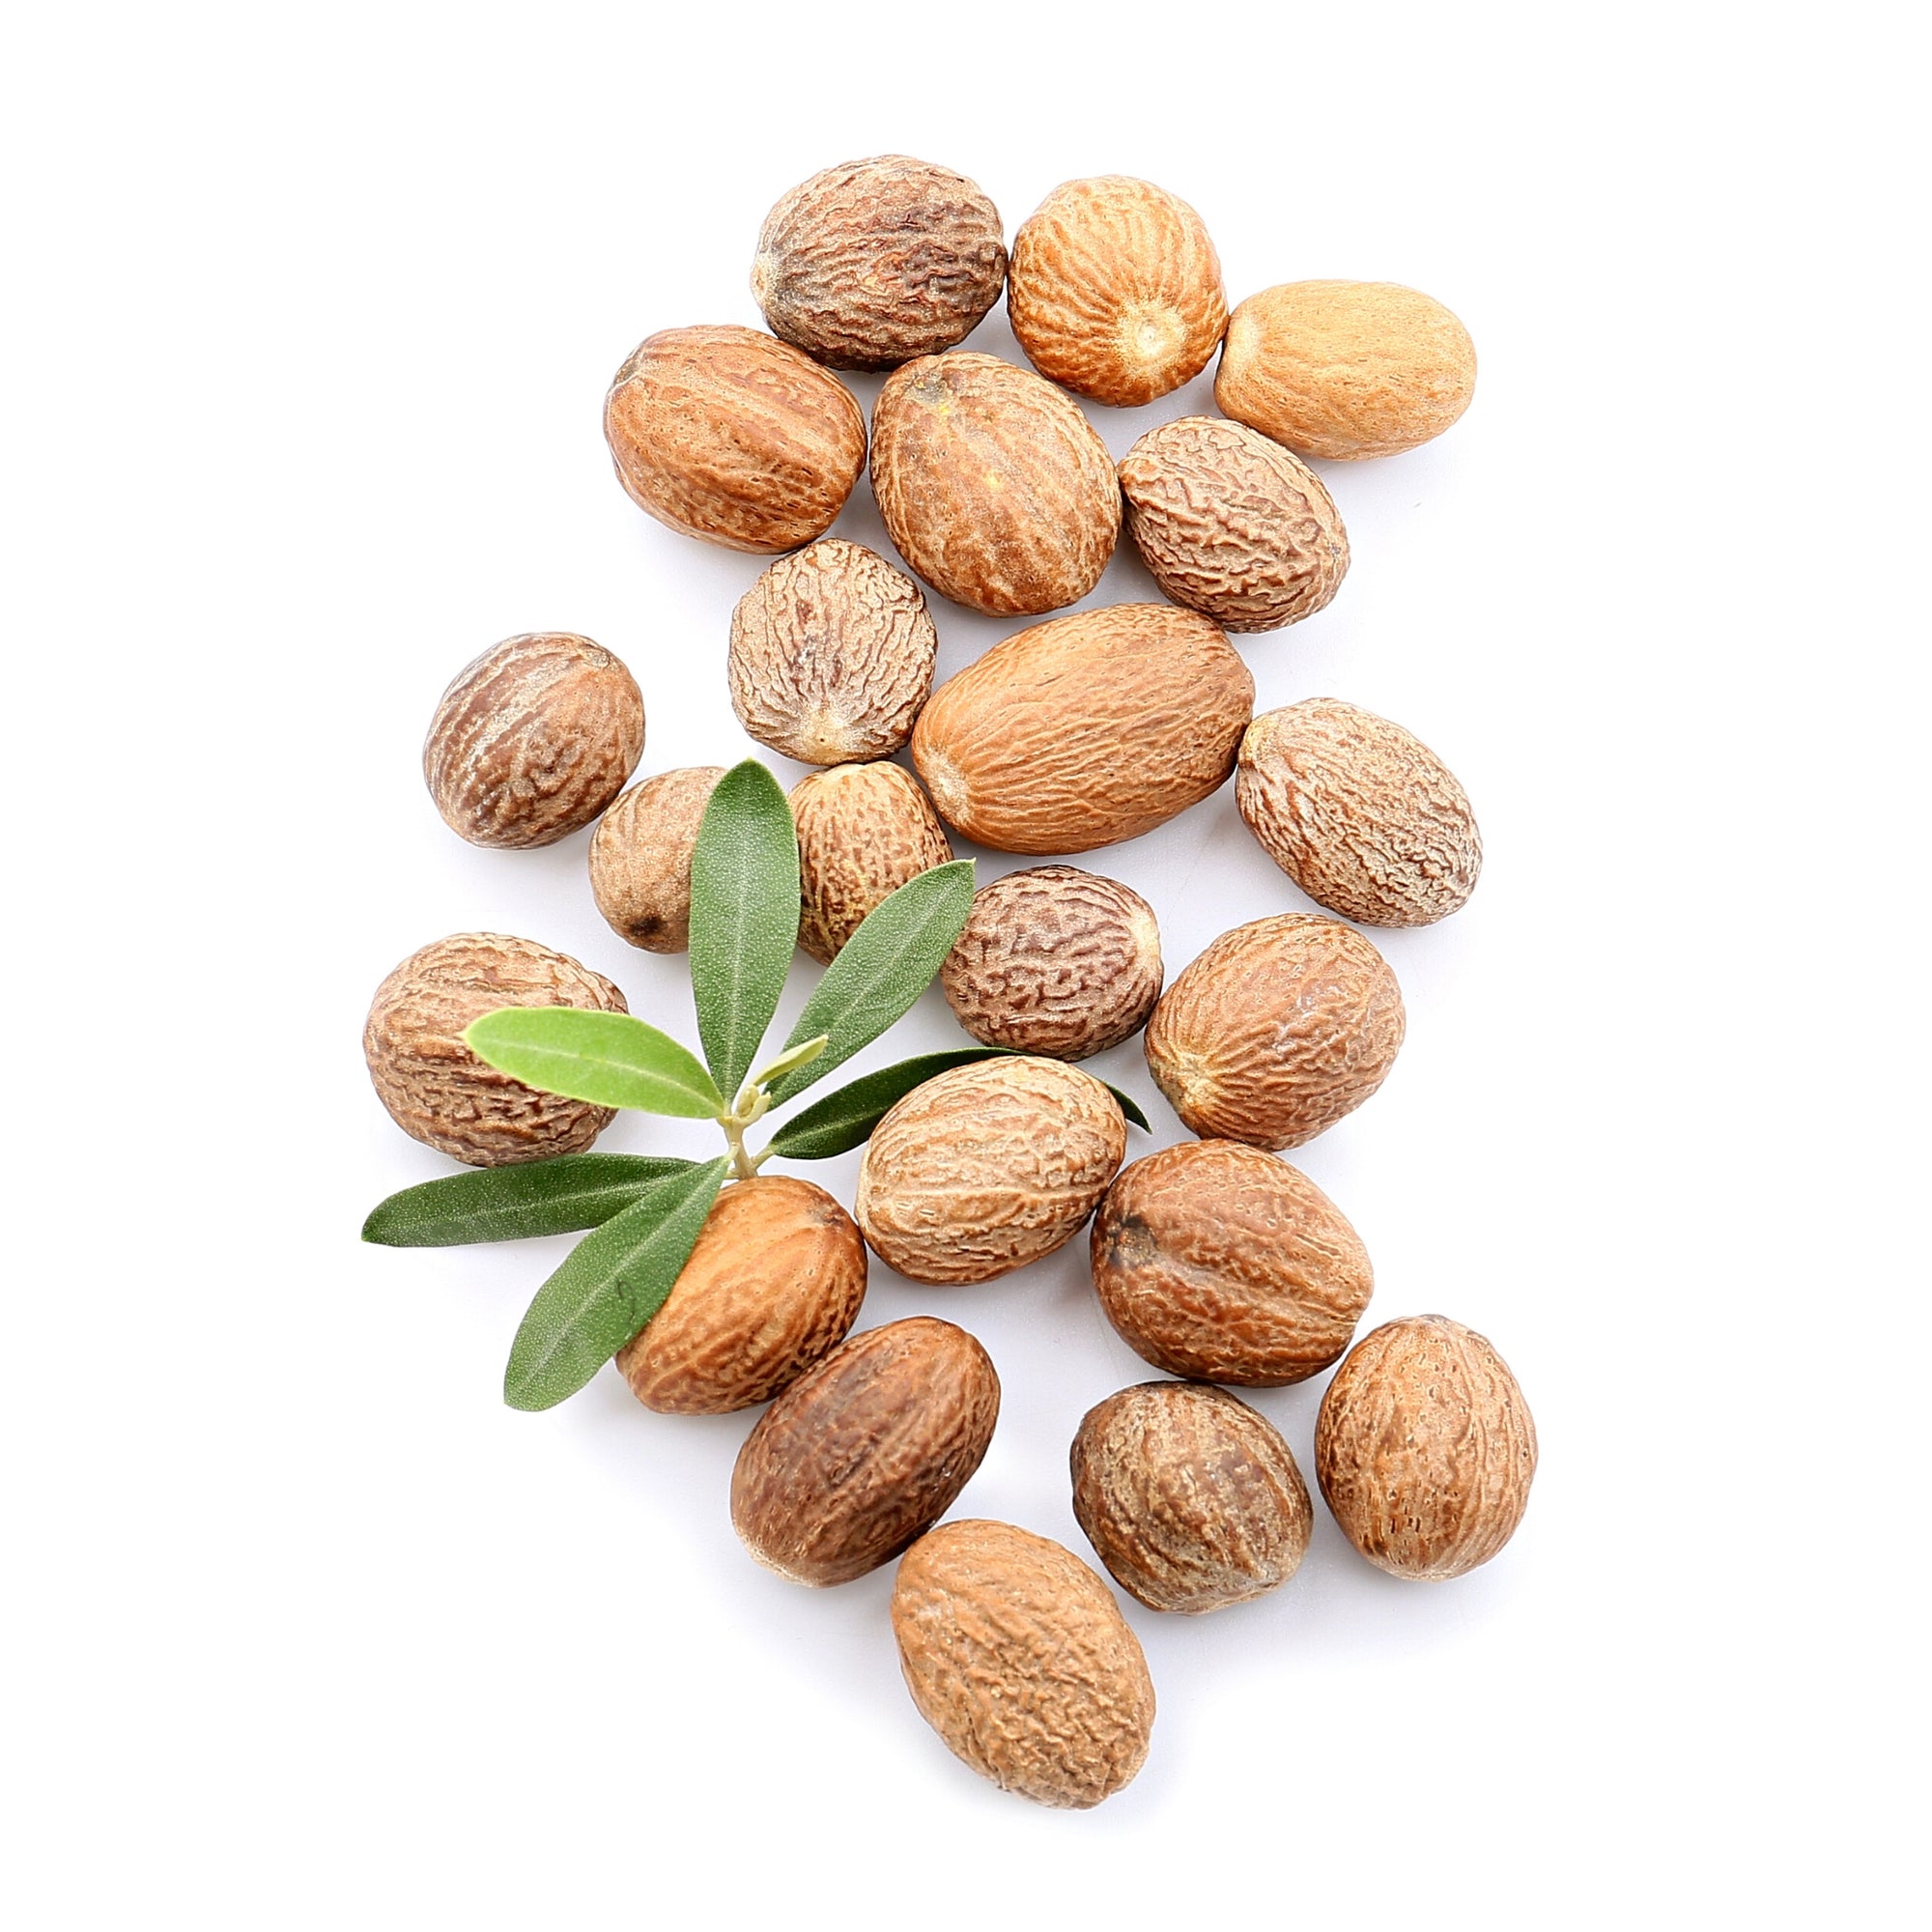 Image of a heap of shea nuts on a white background, symbolizing the natural ingredients used in &Better's personal care products. The image represents the brand's commitment to harnessing the power of nature for a personal care experience that resonates with the mind, body, and soul